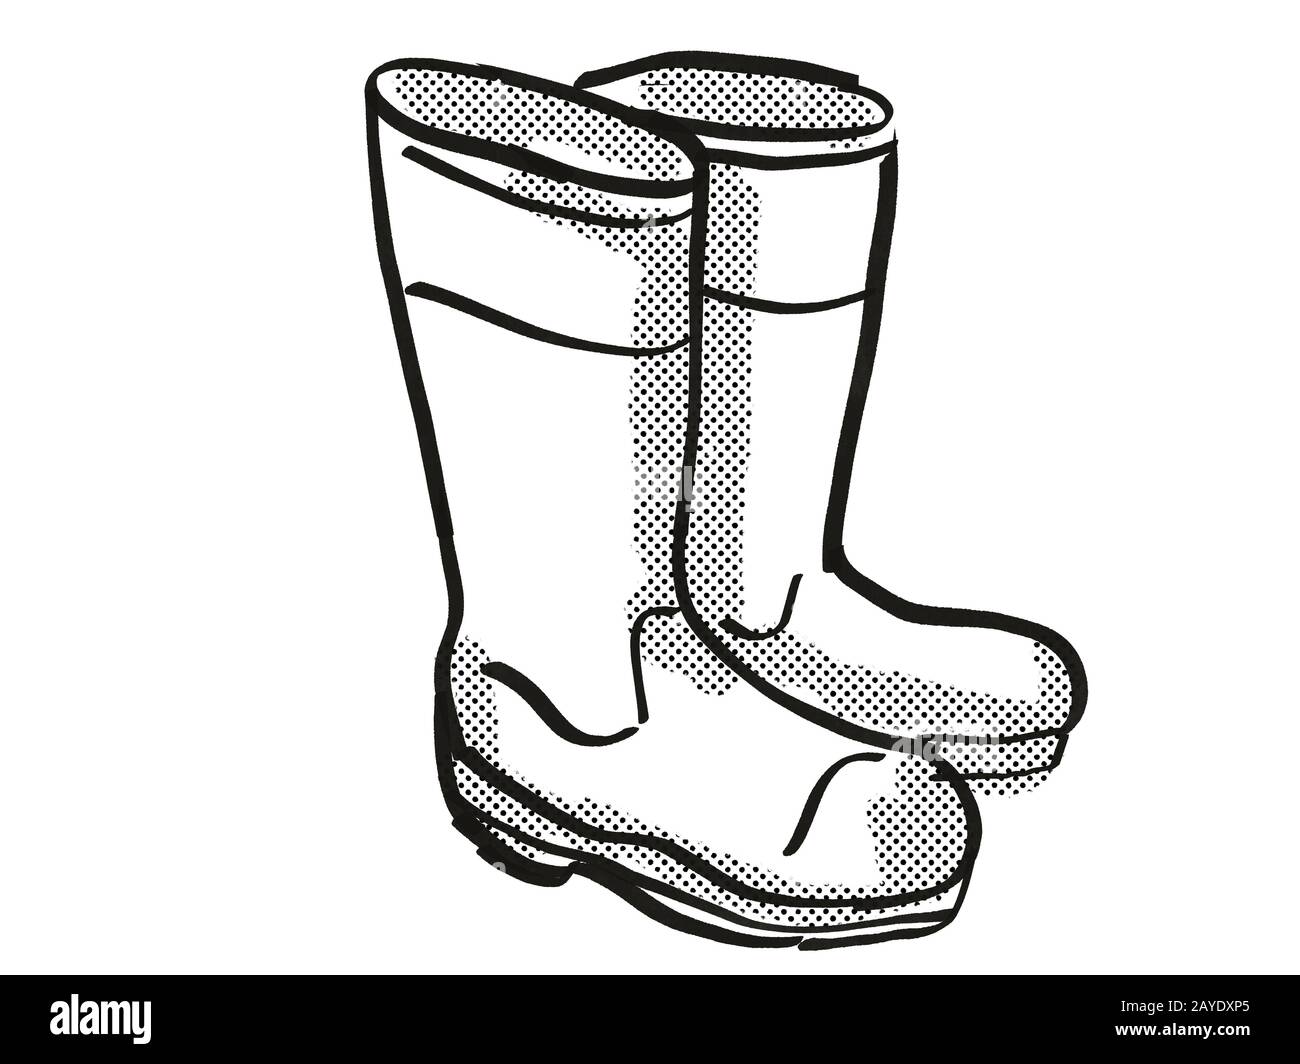 Wellington Rubber Boots or Gumboots Cartoon Retro Drawing Stock Photo ...